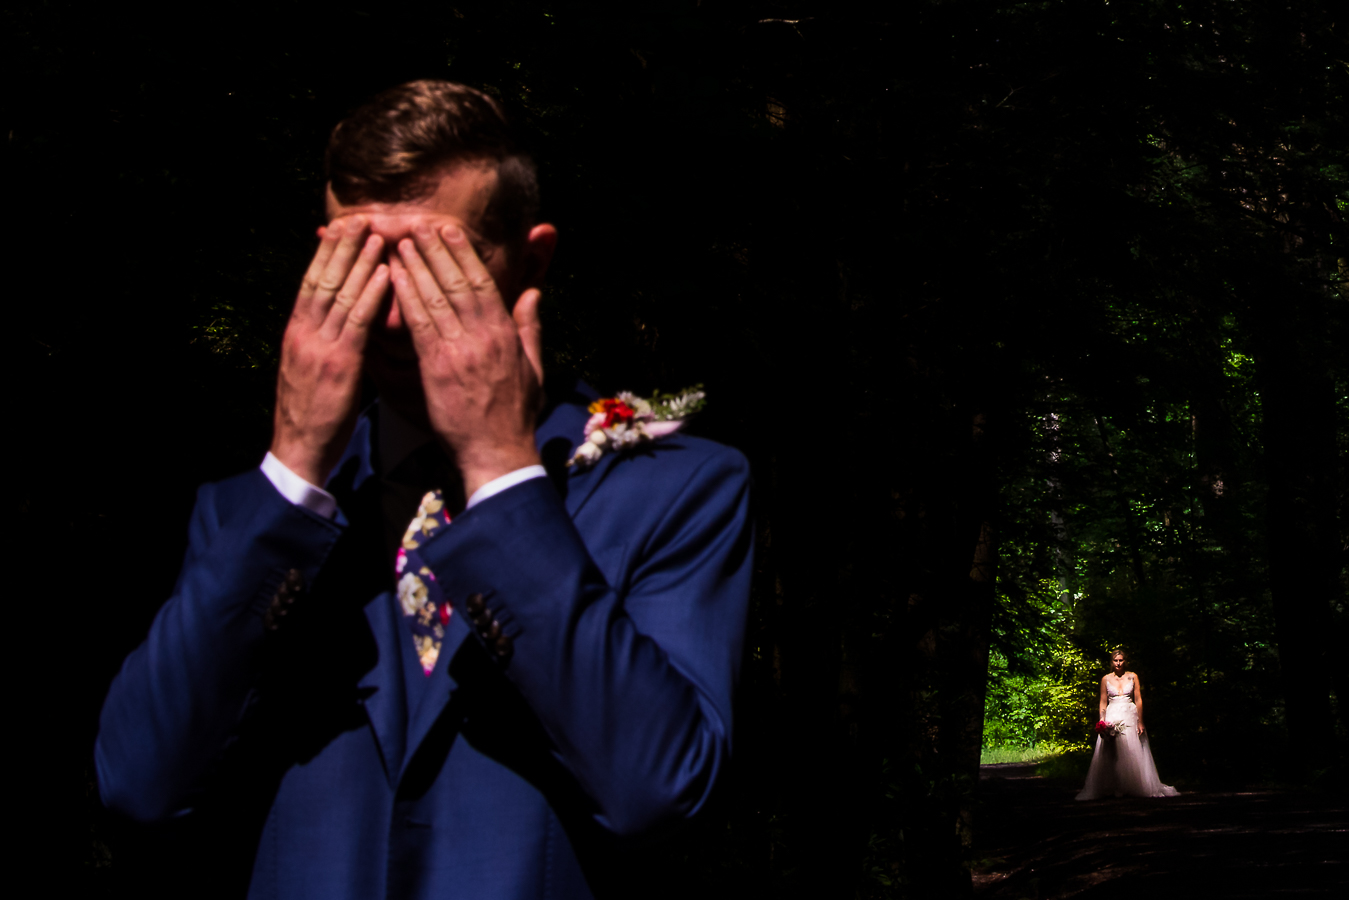 wedding photographer, lisa rhinehart, captures this image of the groom covering his eyes as the bride walks up behind him to share their first look together on the hiking trail in pa 